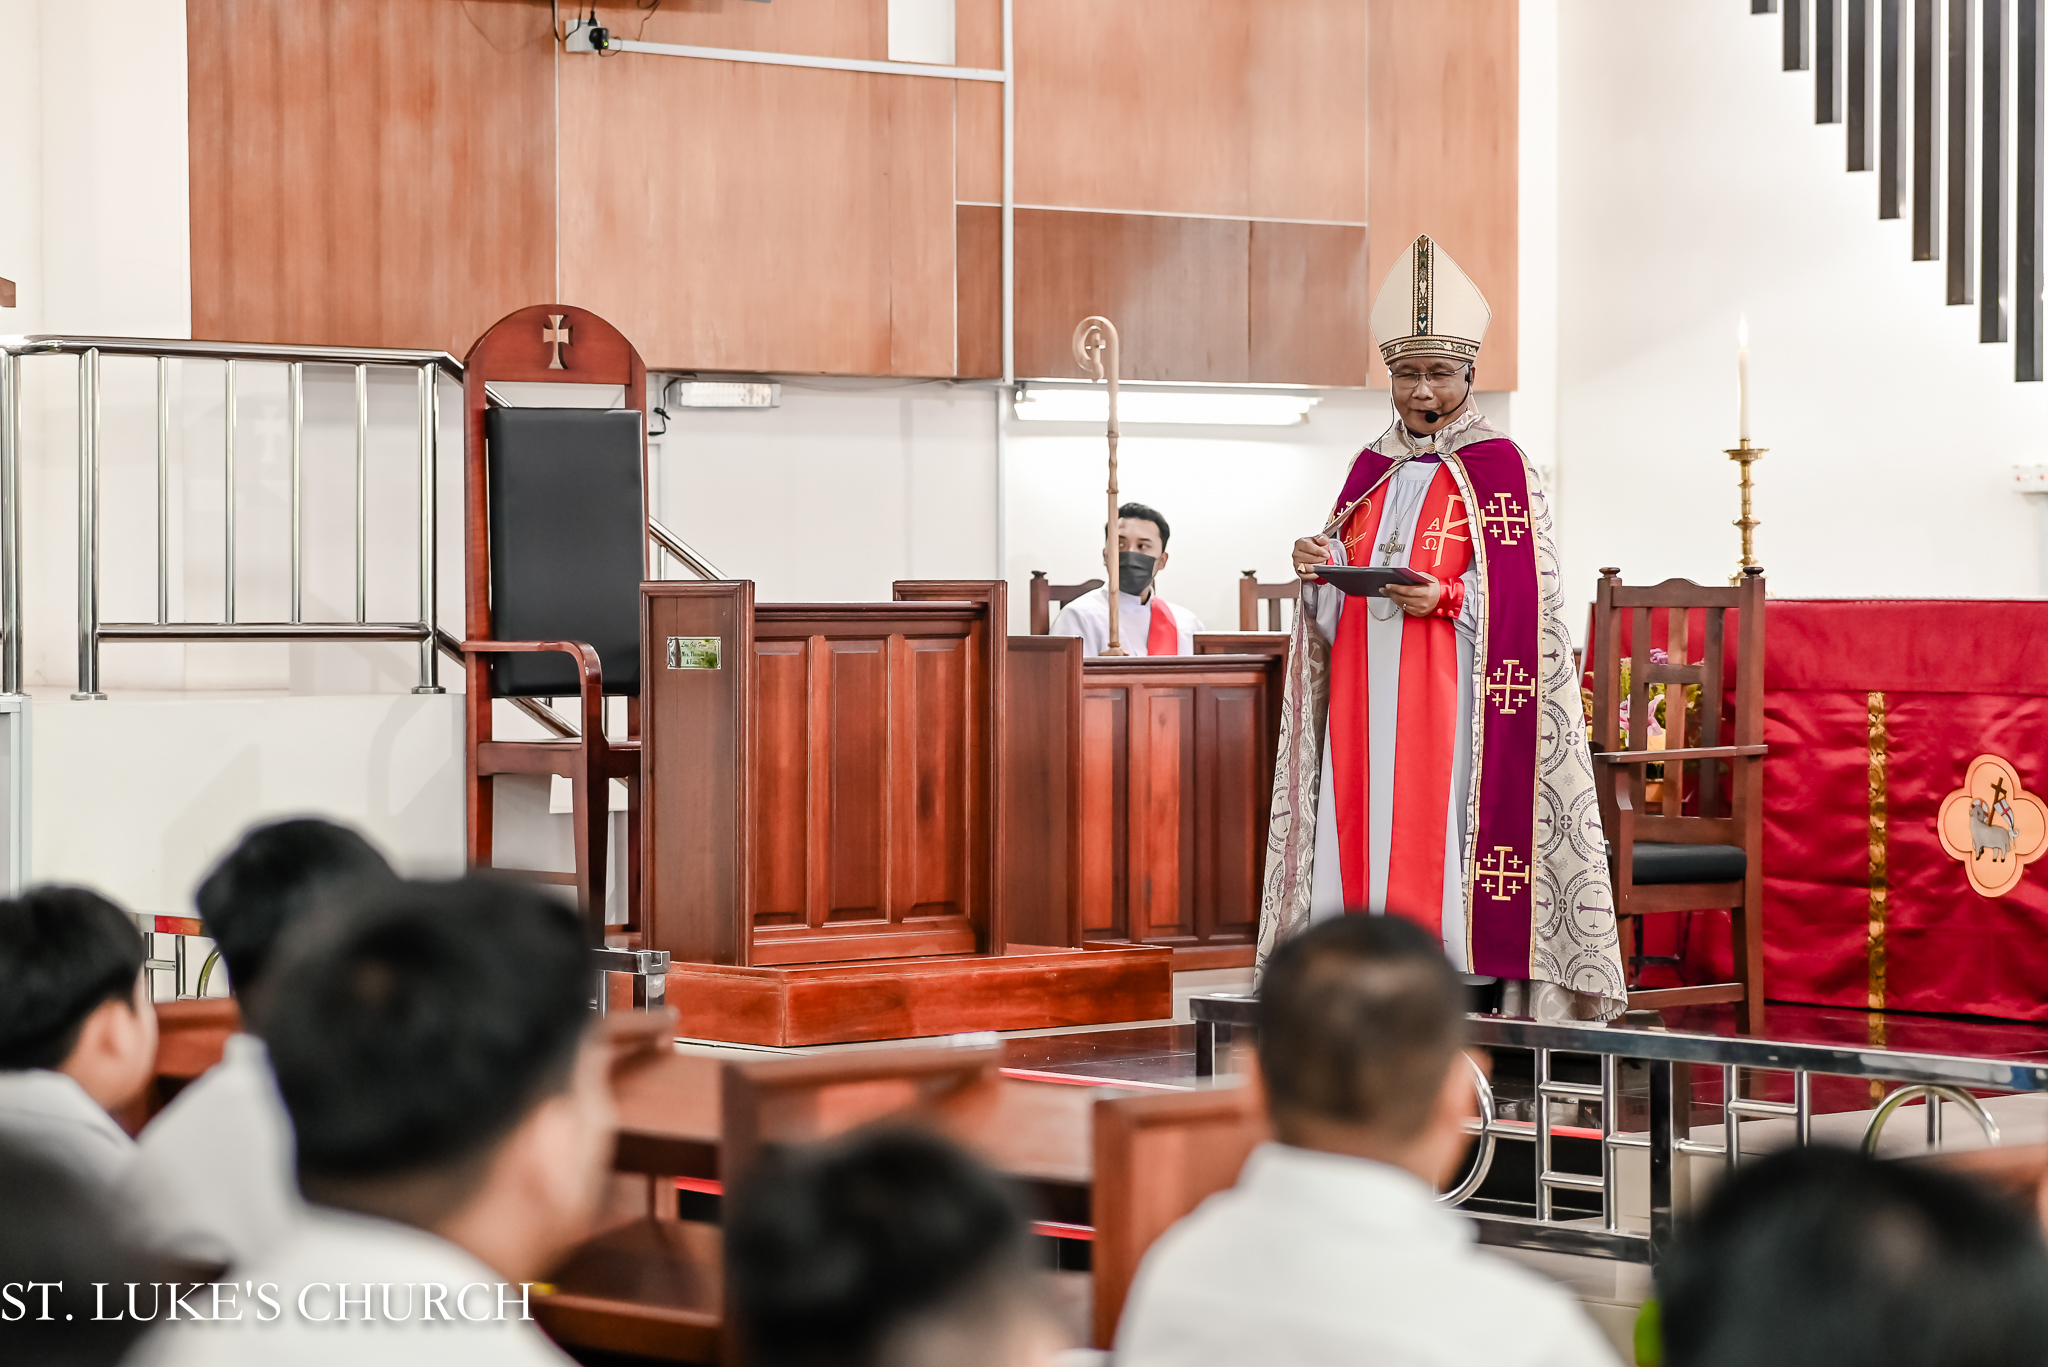 Don’t involve students in ongoing Middle East conflict, Kuching bishop tells edu authorities